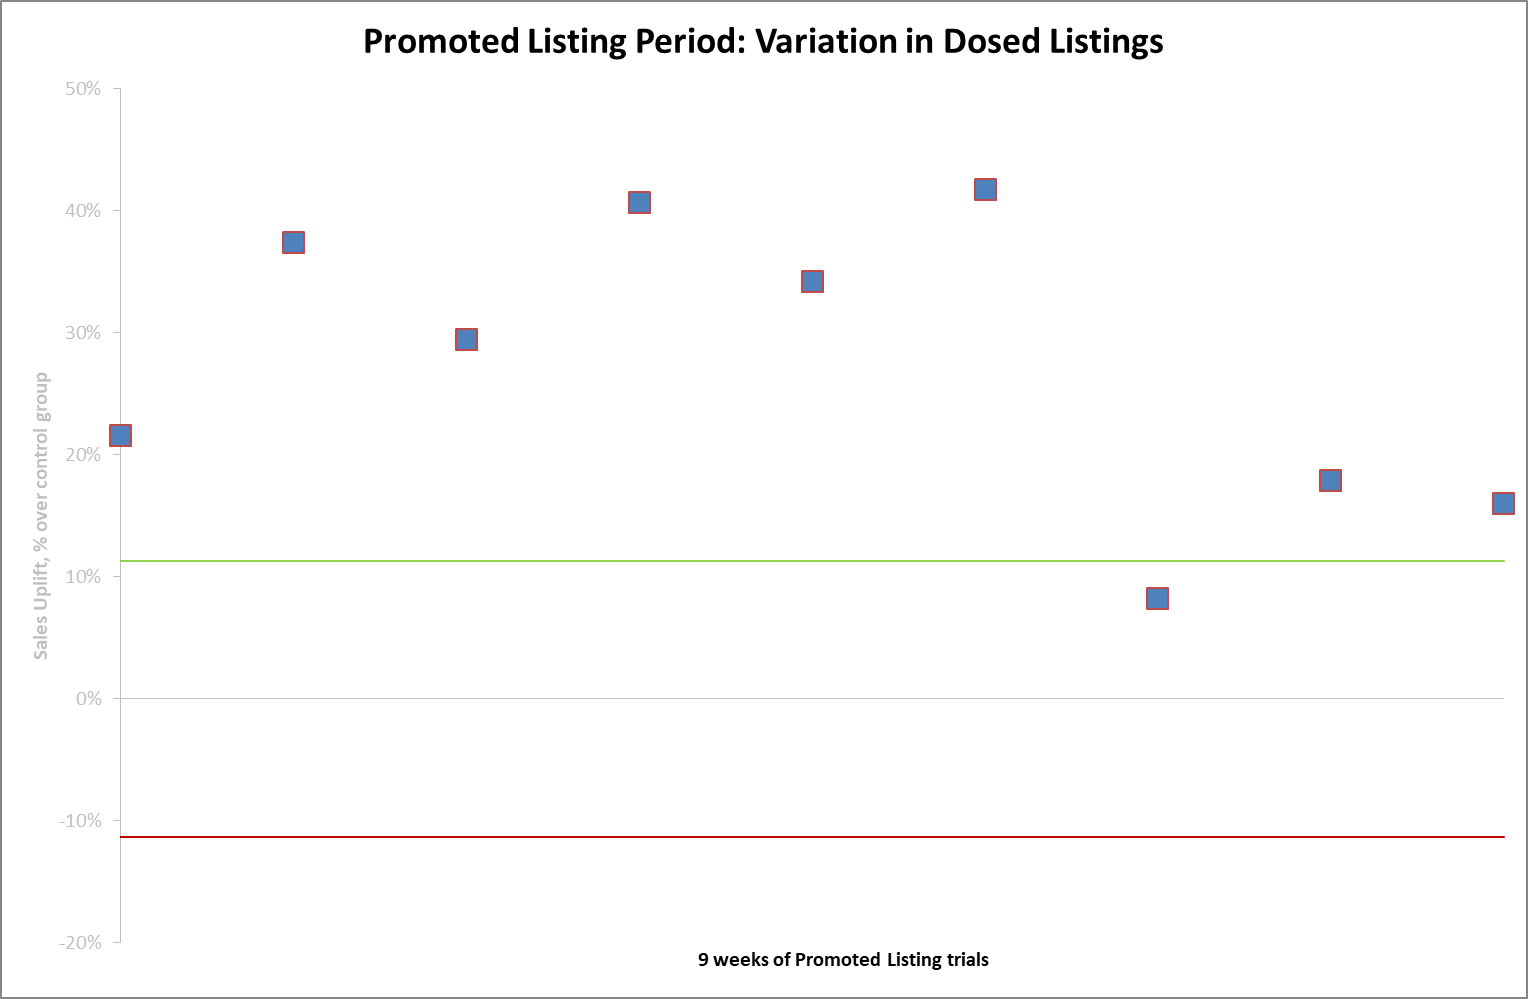 eBay Promoted Listings Period Variation in Dosed Listings